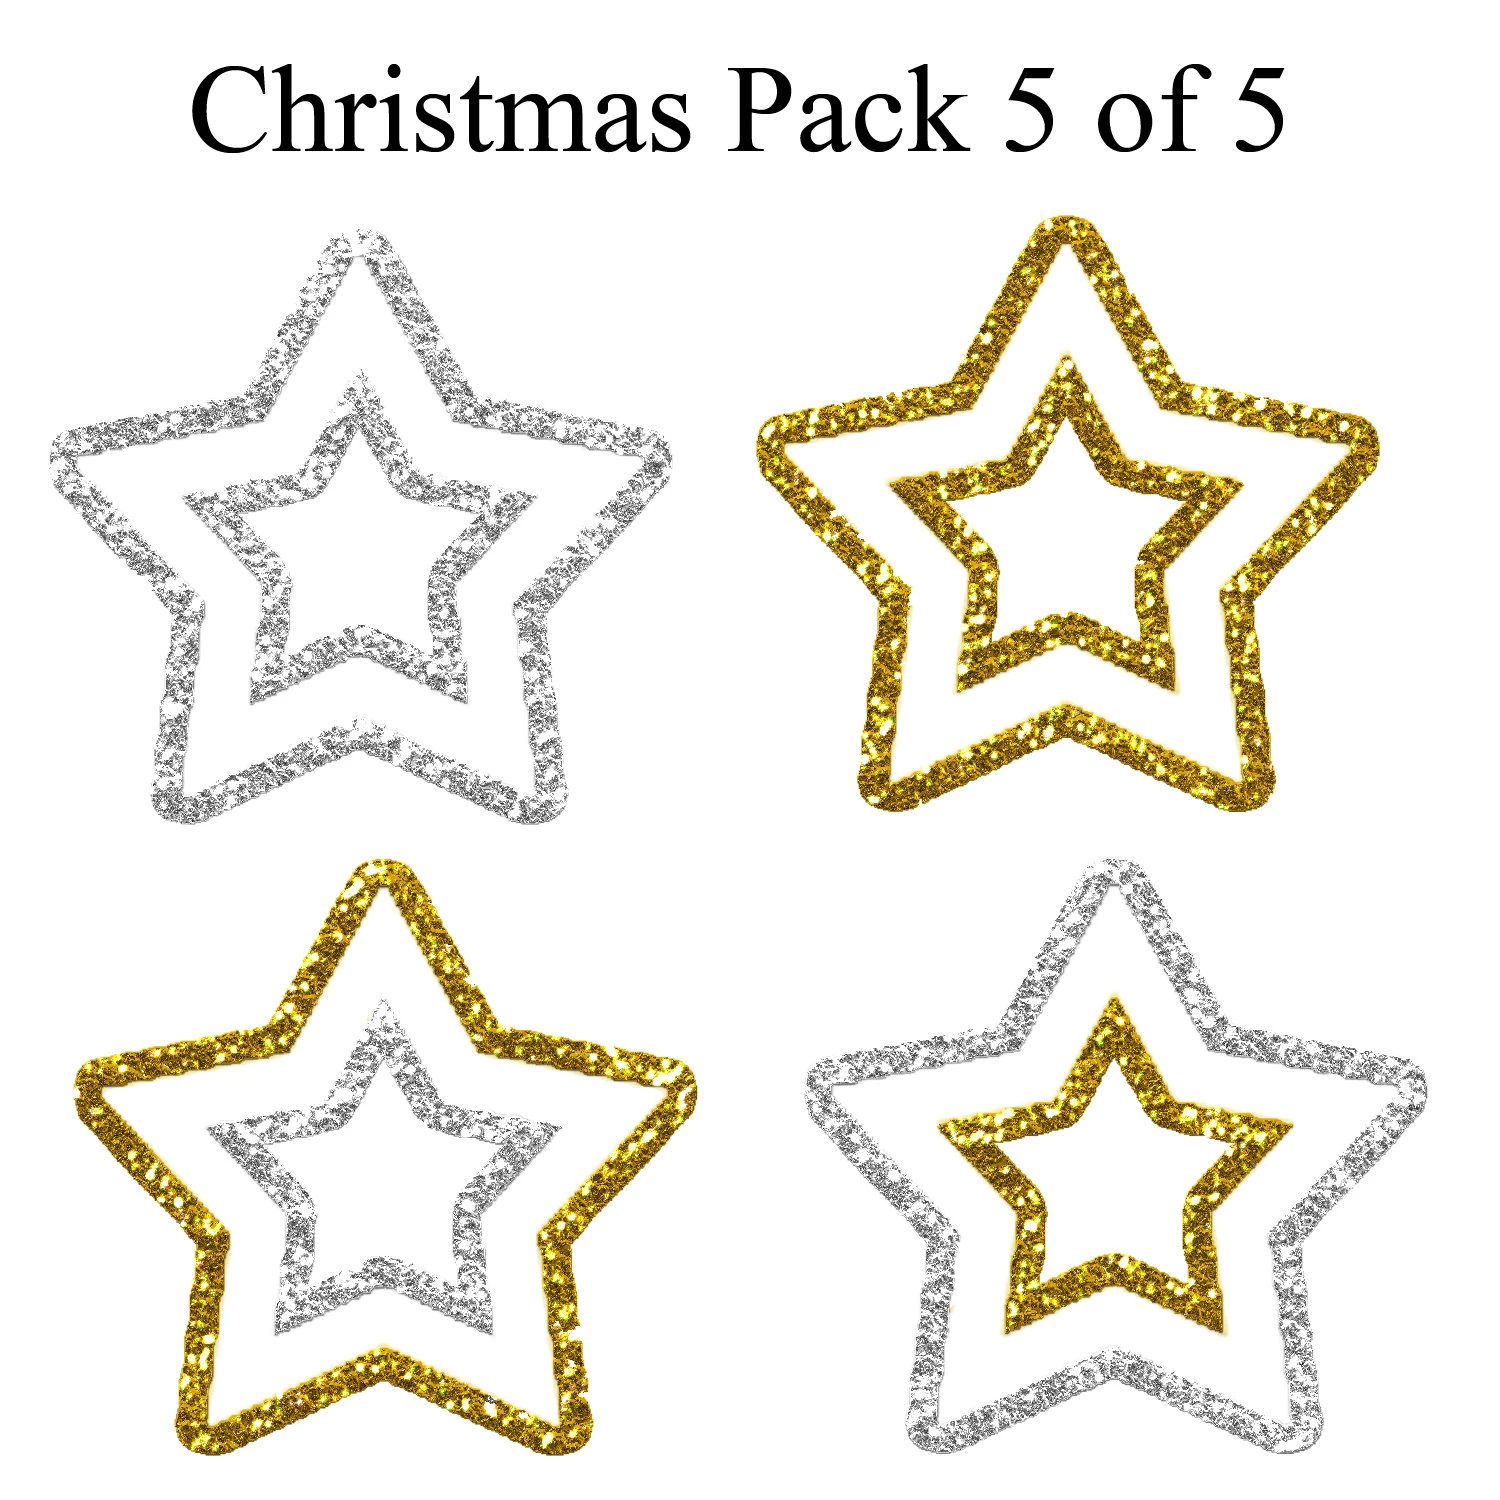 christmas_pack_5_of_5___stars2_by_hermit_stock